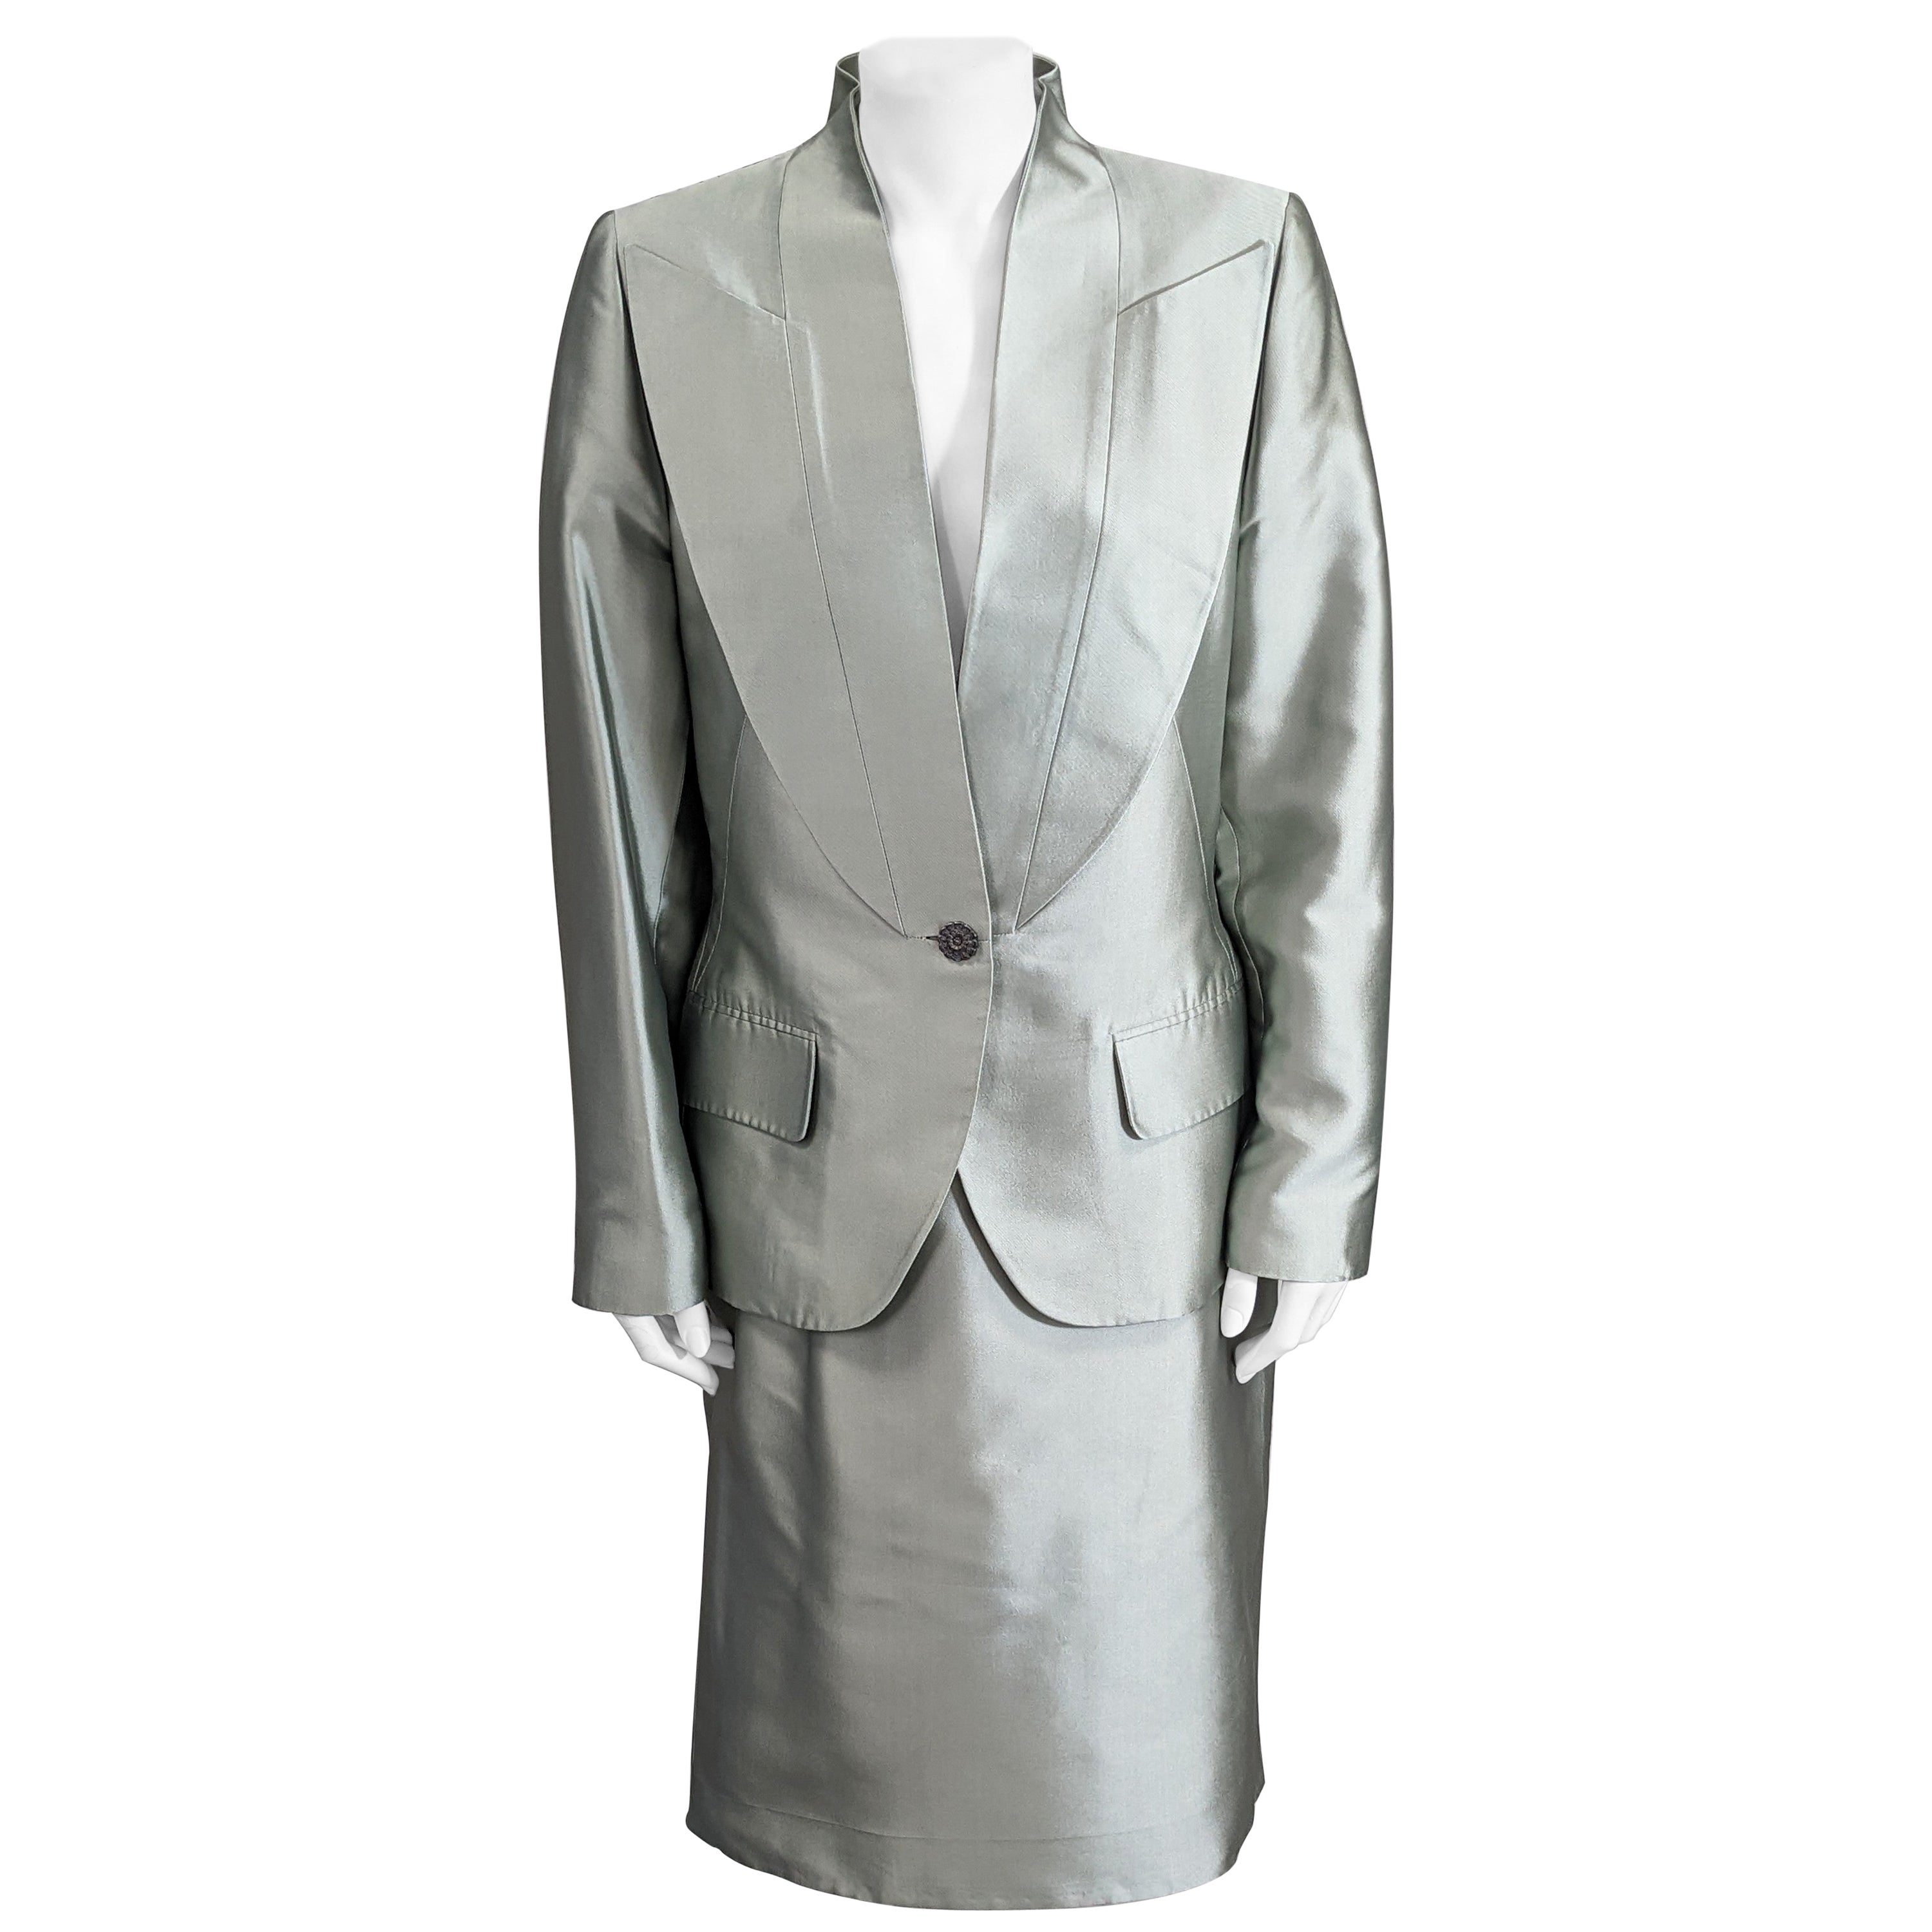 Givenchy Haute Couture Celadon Silk Twill Suit, Alexander McQueen For Sale